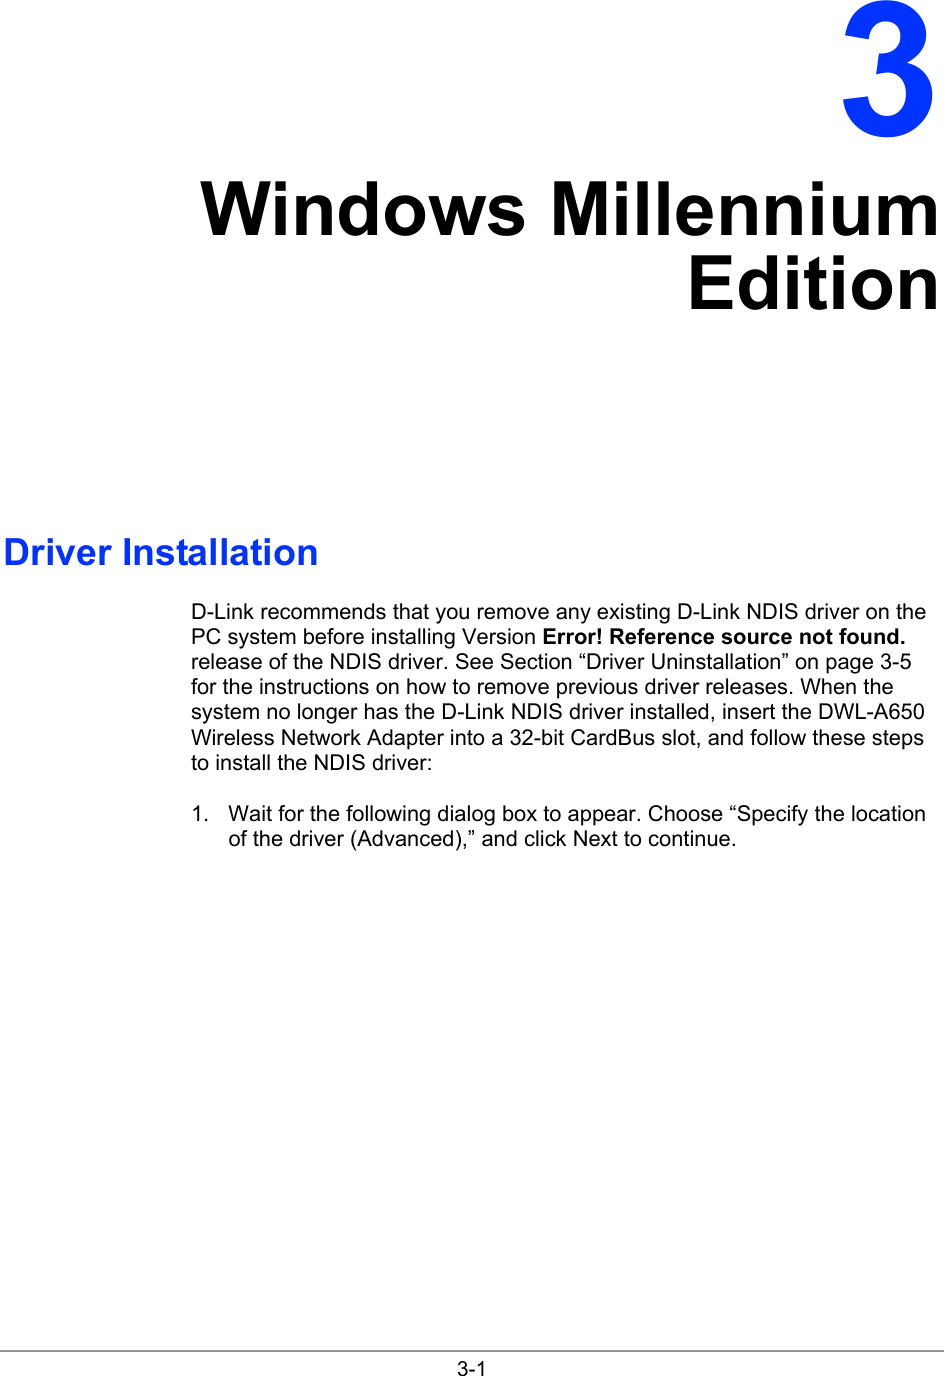  3-1 3 Windows Millennium Edition Driver Installation D-Link recommends that you remove any existing D-Link NDIS driver on the PC system before installing Version Error! Reference source not found. release of the NDIS driver. See Section “Driver Uninstallation” on page 3-5 for the instructions on how to remove previous driver releases. When the system no longer has the D-Link NDIS driver installed, insert the DWL-A650 Wireless Network Adapter into a 32-bit CardBus slot, and follow these steps to install the NDIS driver: 1.  Wait for the following dialog box to appear. Choose “Specify the location of the driver (Advanced),” and click Next to continue. 